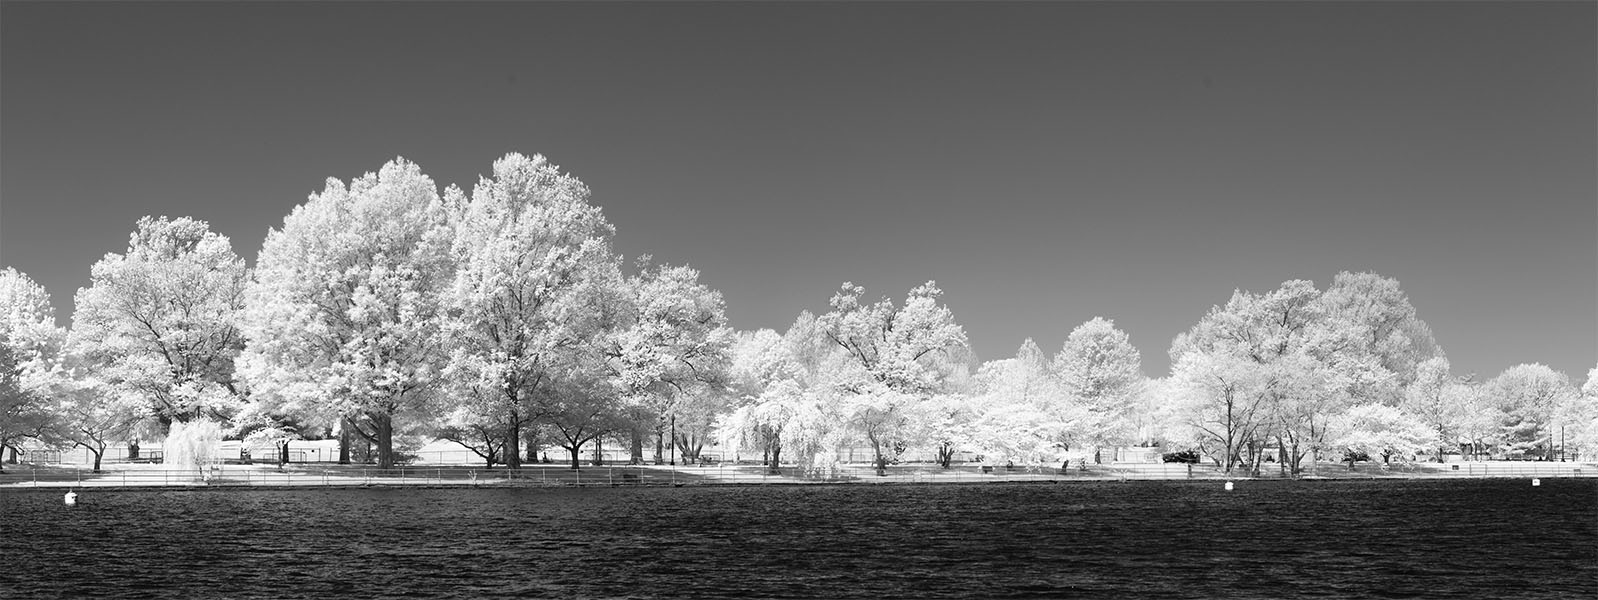 Water and Trees in Infrared